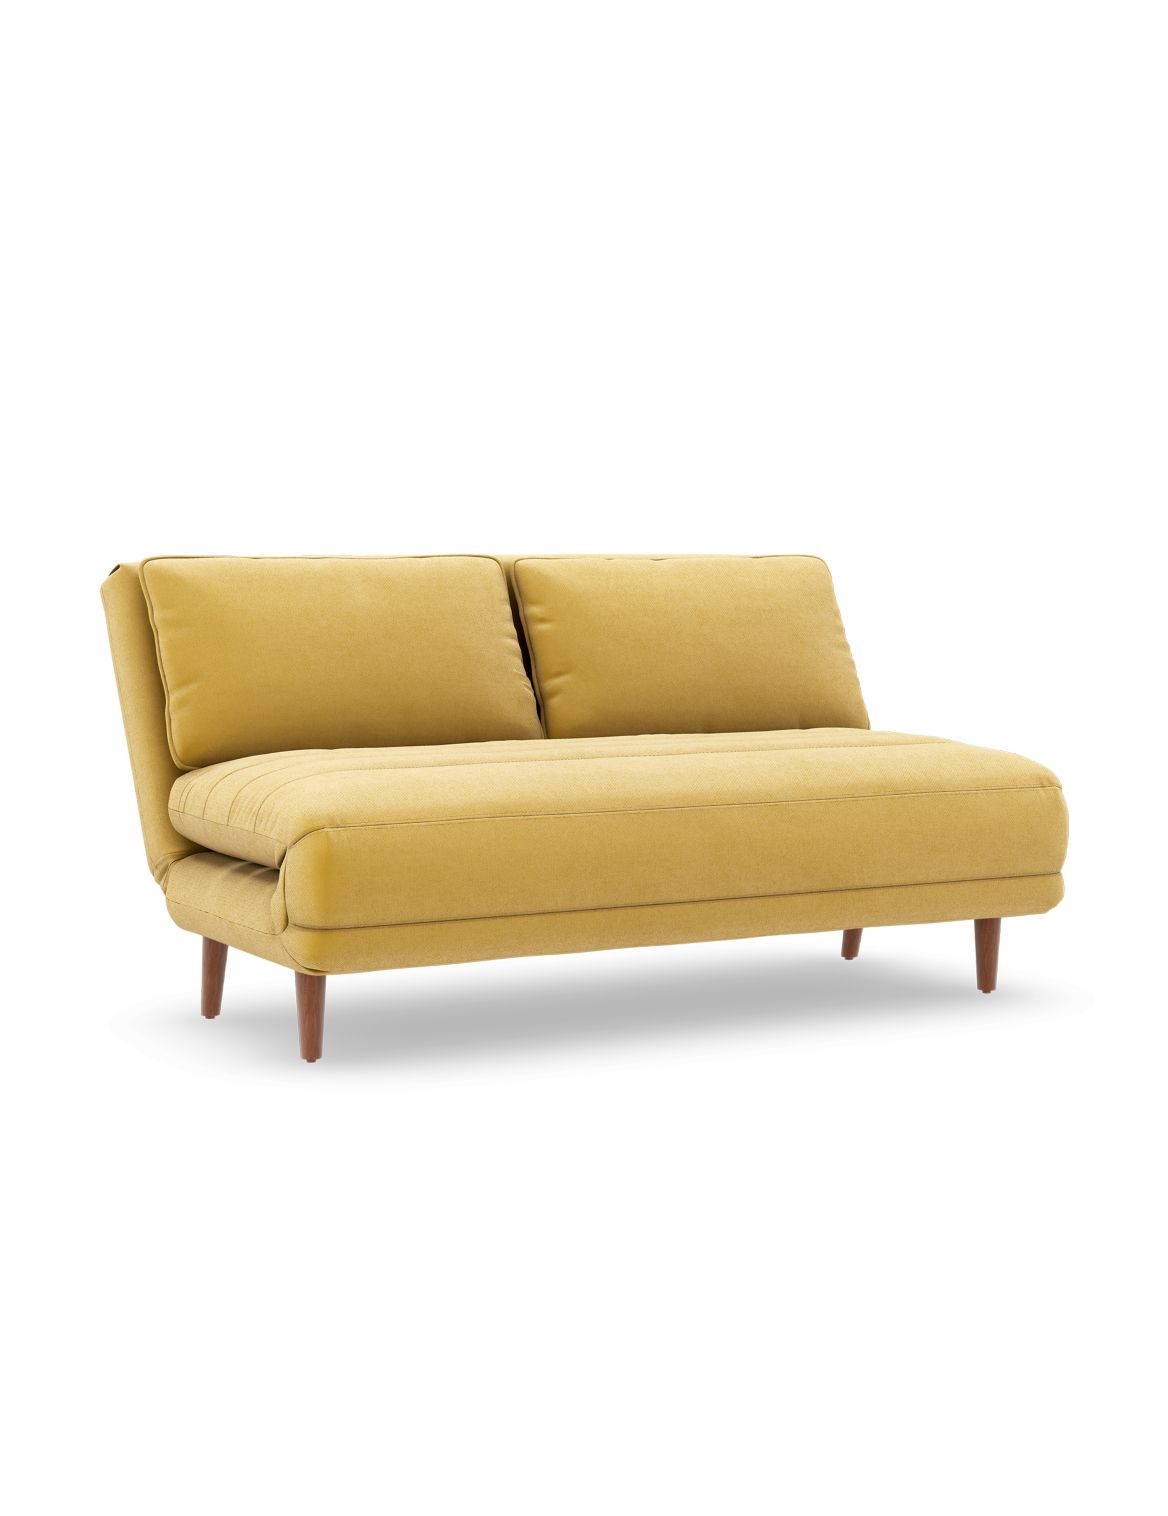 Logan Double Fold Out Sofa Bed yellow